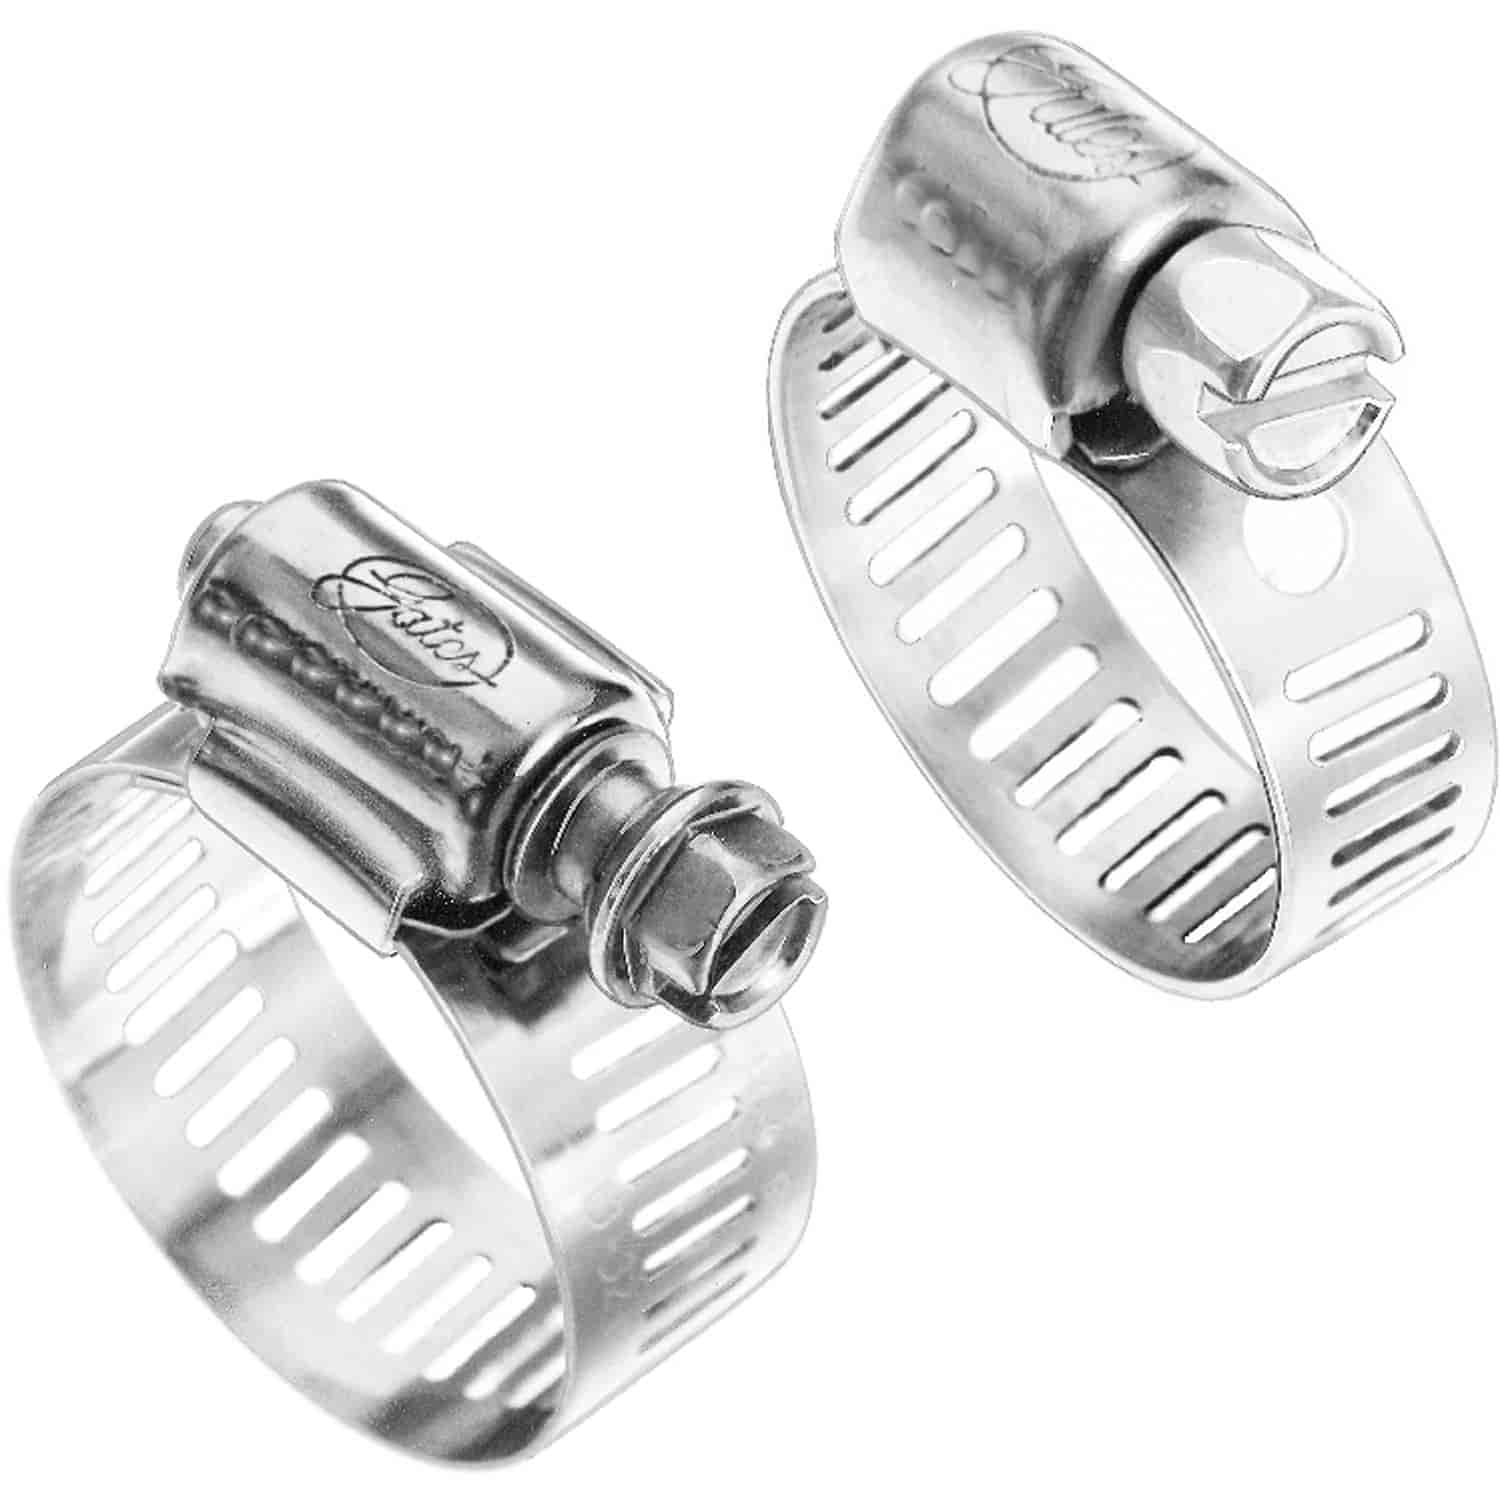 Stainless Steel Hose Clamps Size 32 (1.5